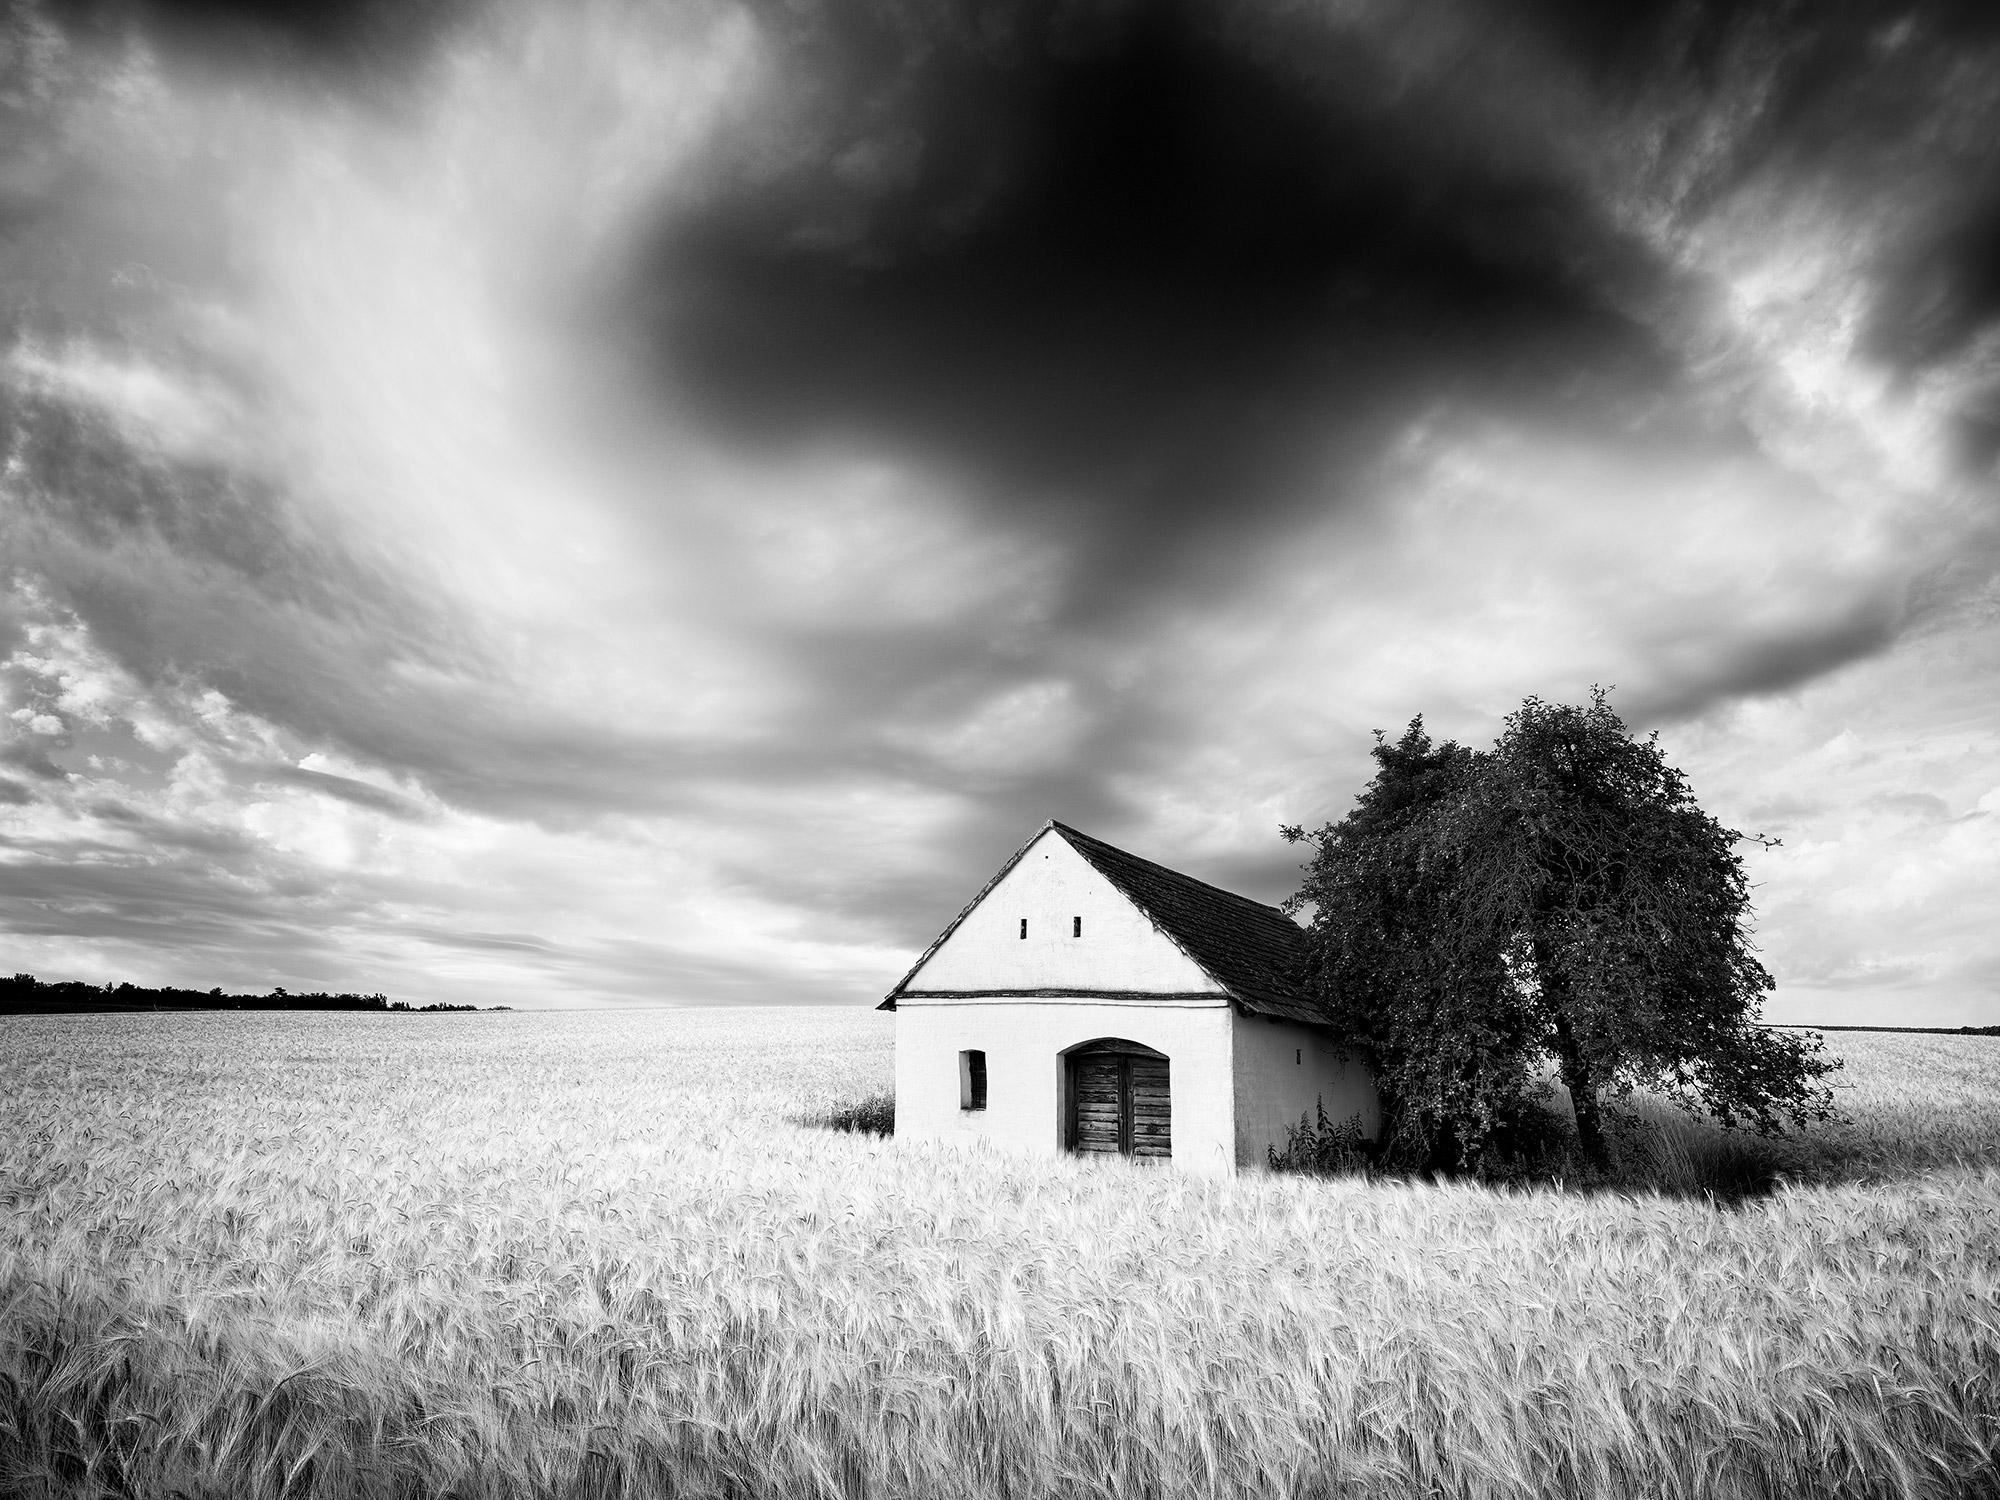 Gerald Berghammer Landscape Photograph - Wine Press House, cornfield, cloudy, black and white photography, landscape